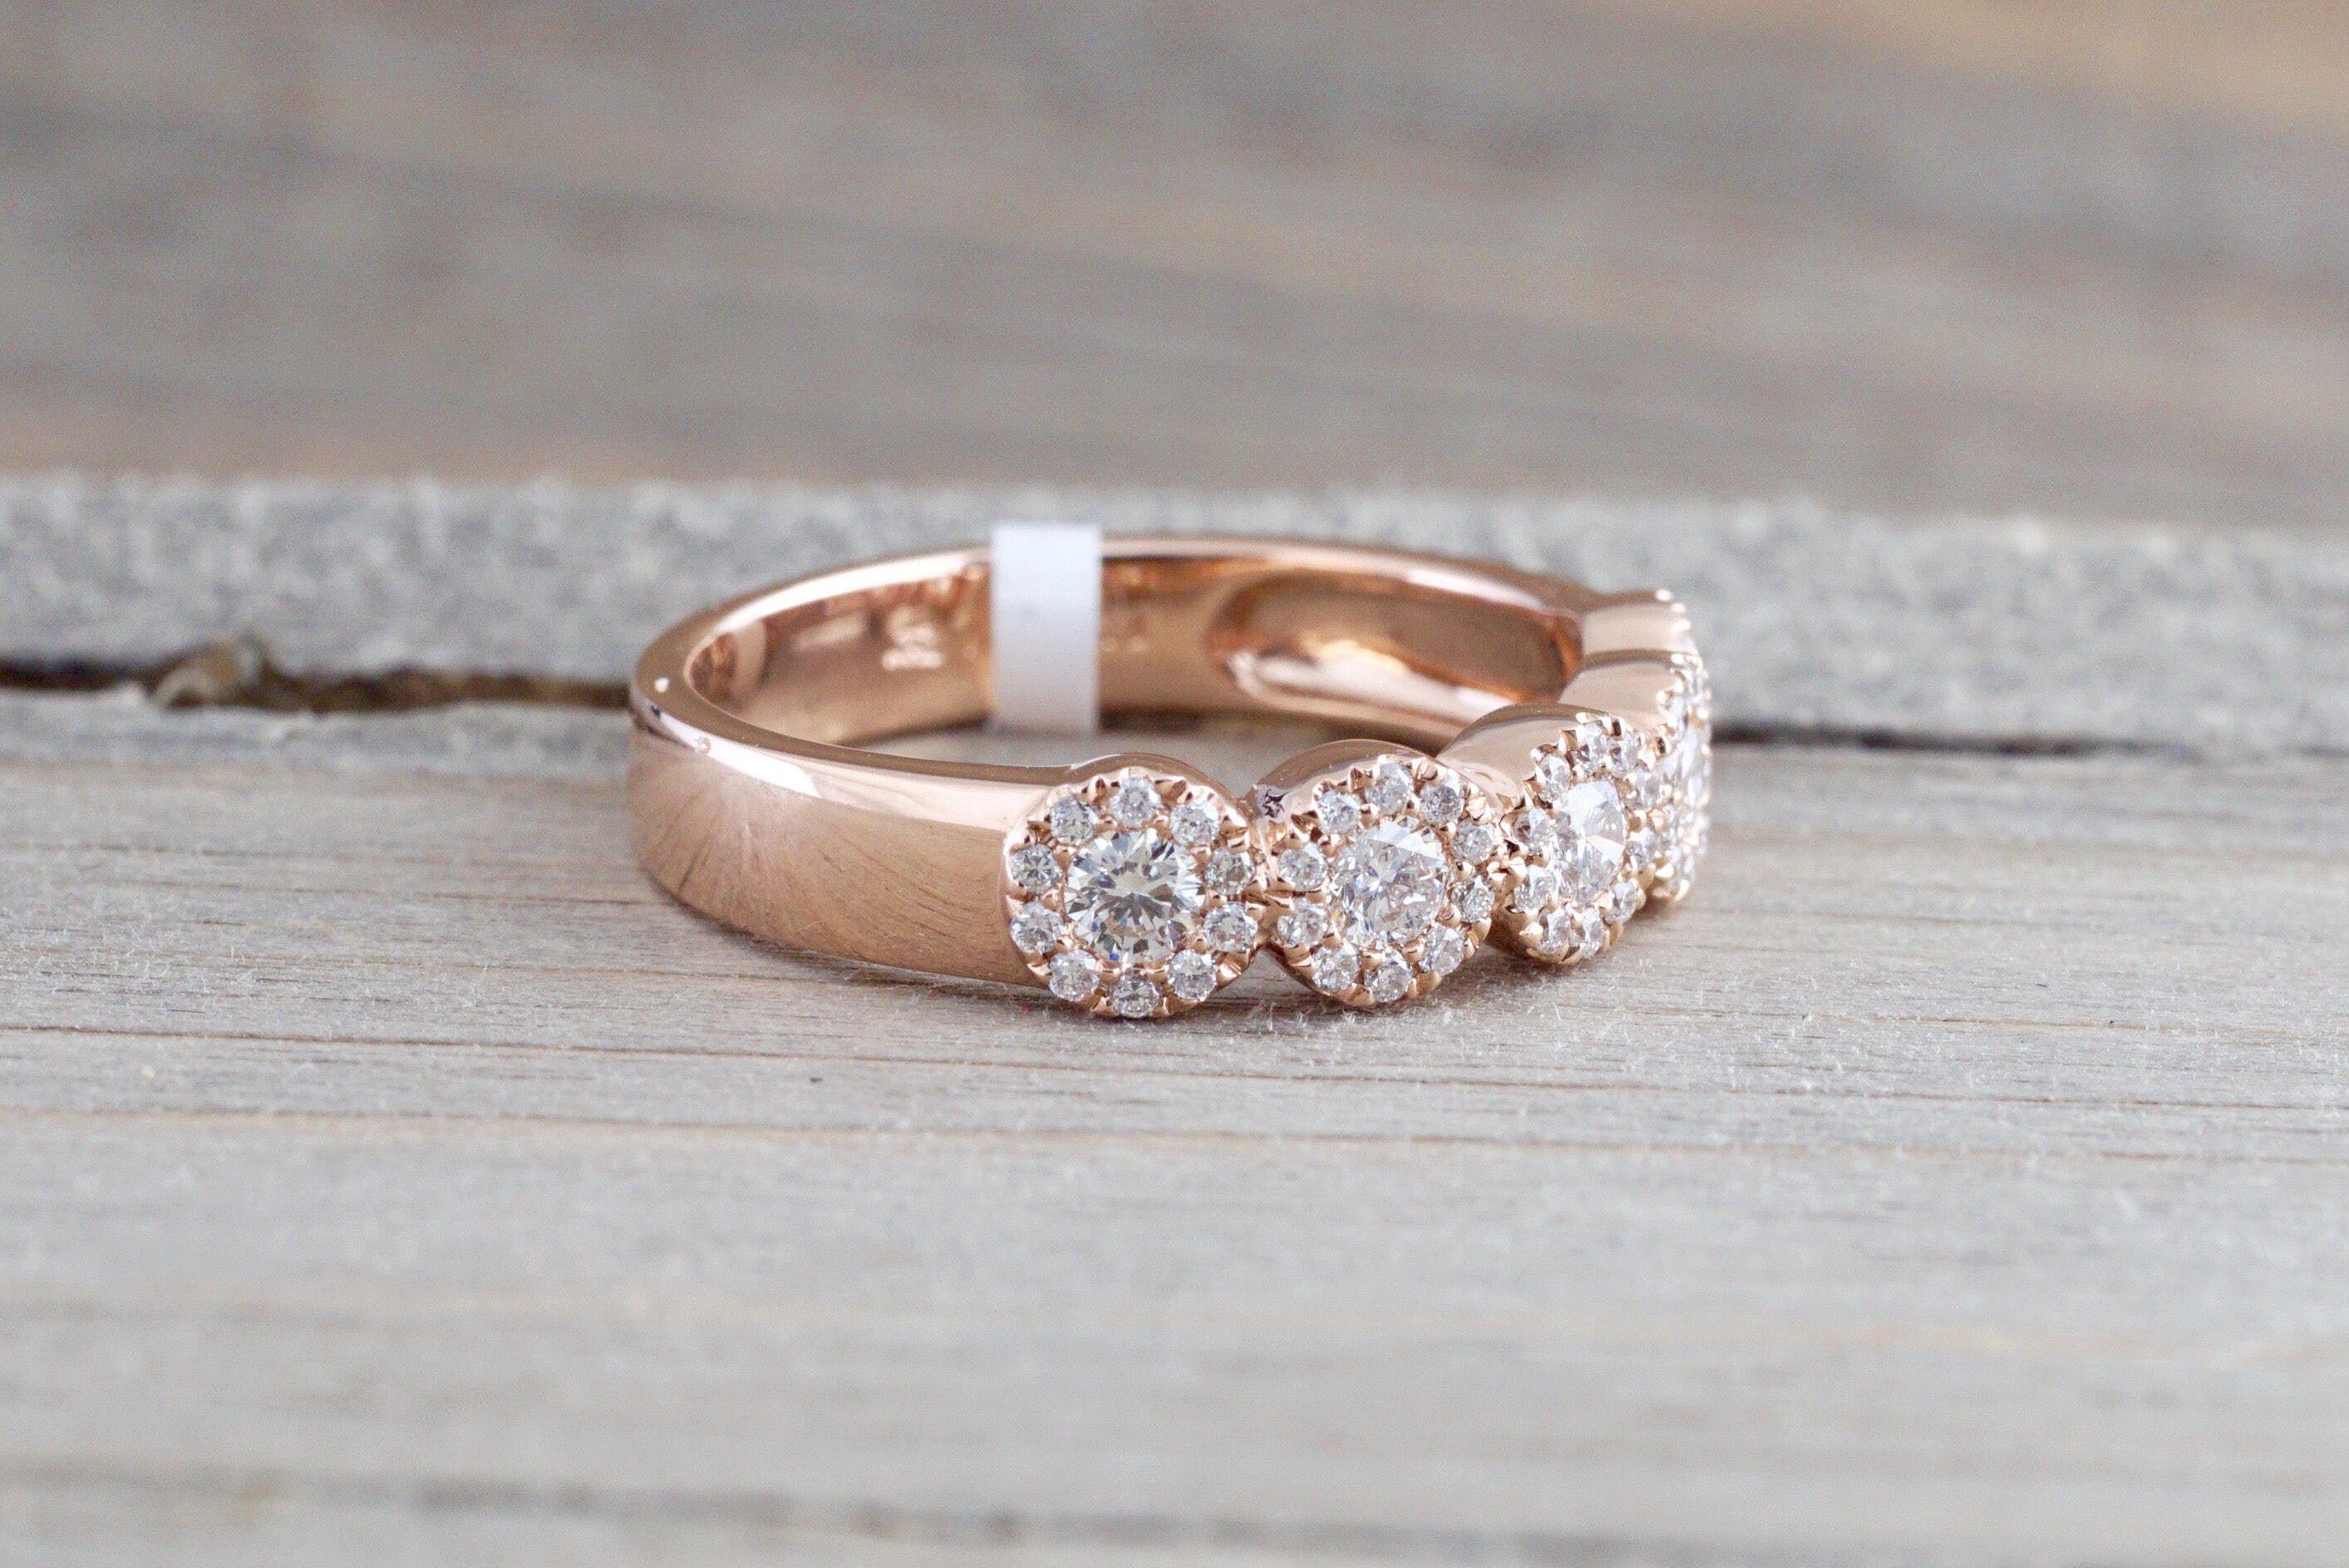 Can I Mix and Match White, Rose, Yellow Gold Wedding Rings? – Happy Jewelers